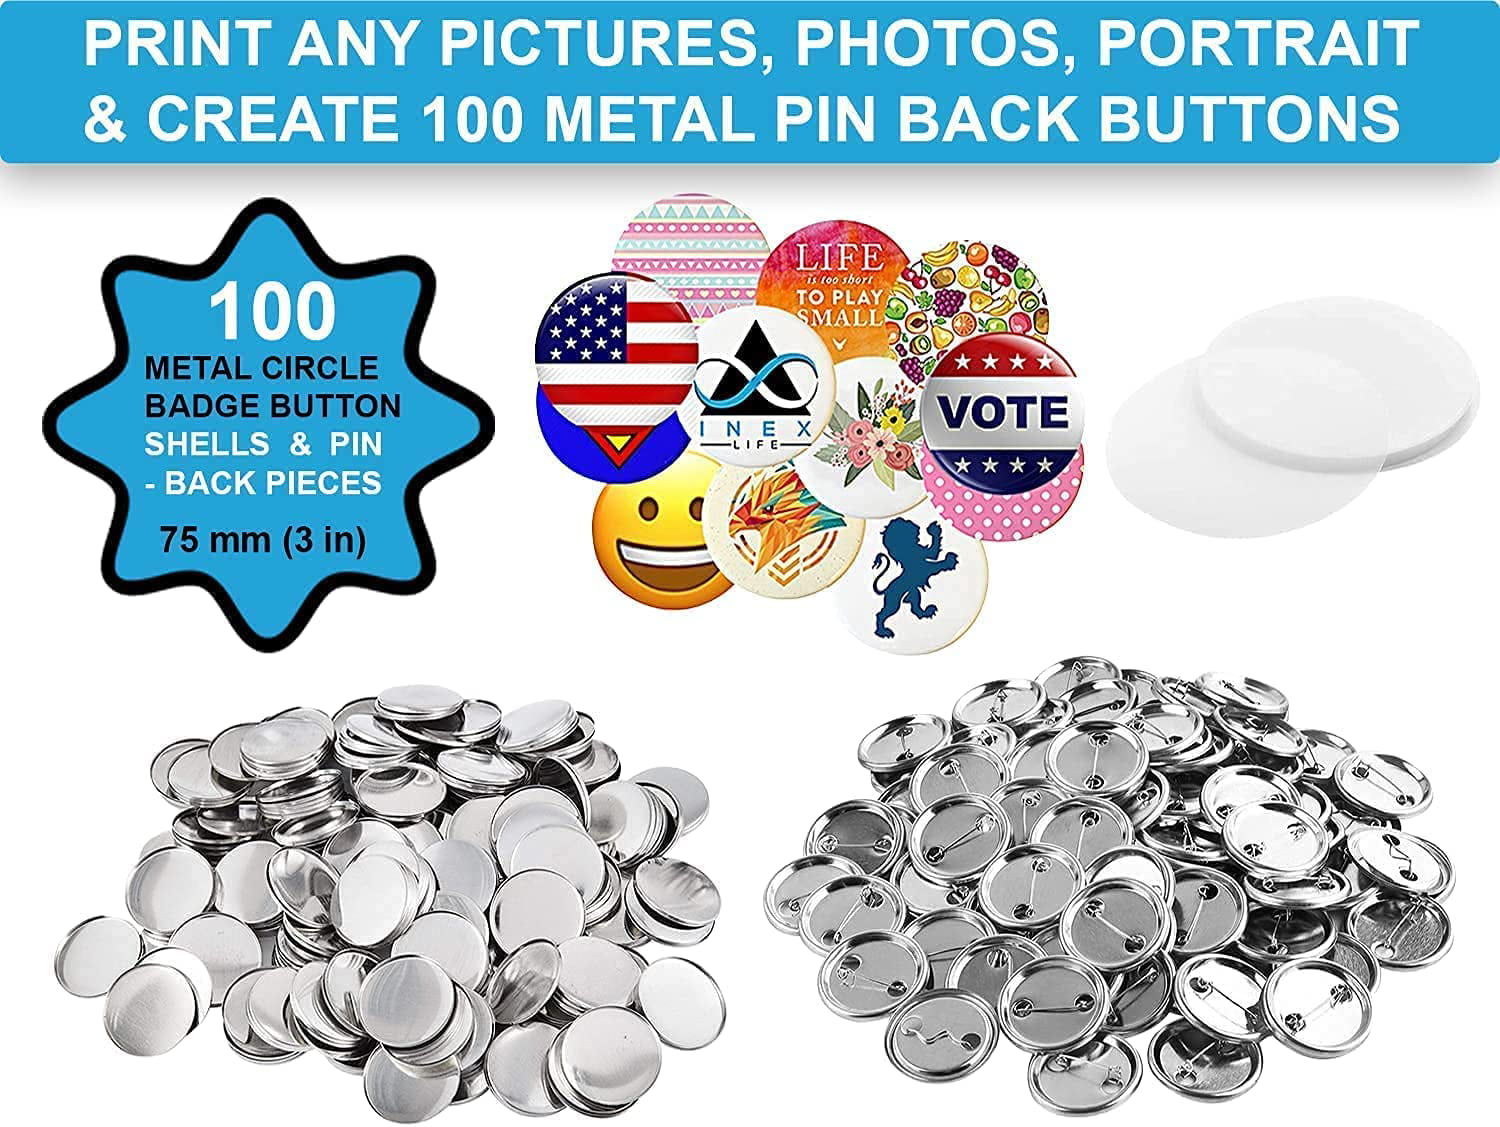 100 Sets of Pocket Mirrors Metal Button Supplies Button Parts 58mm/75m